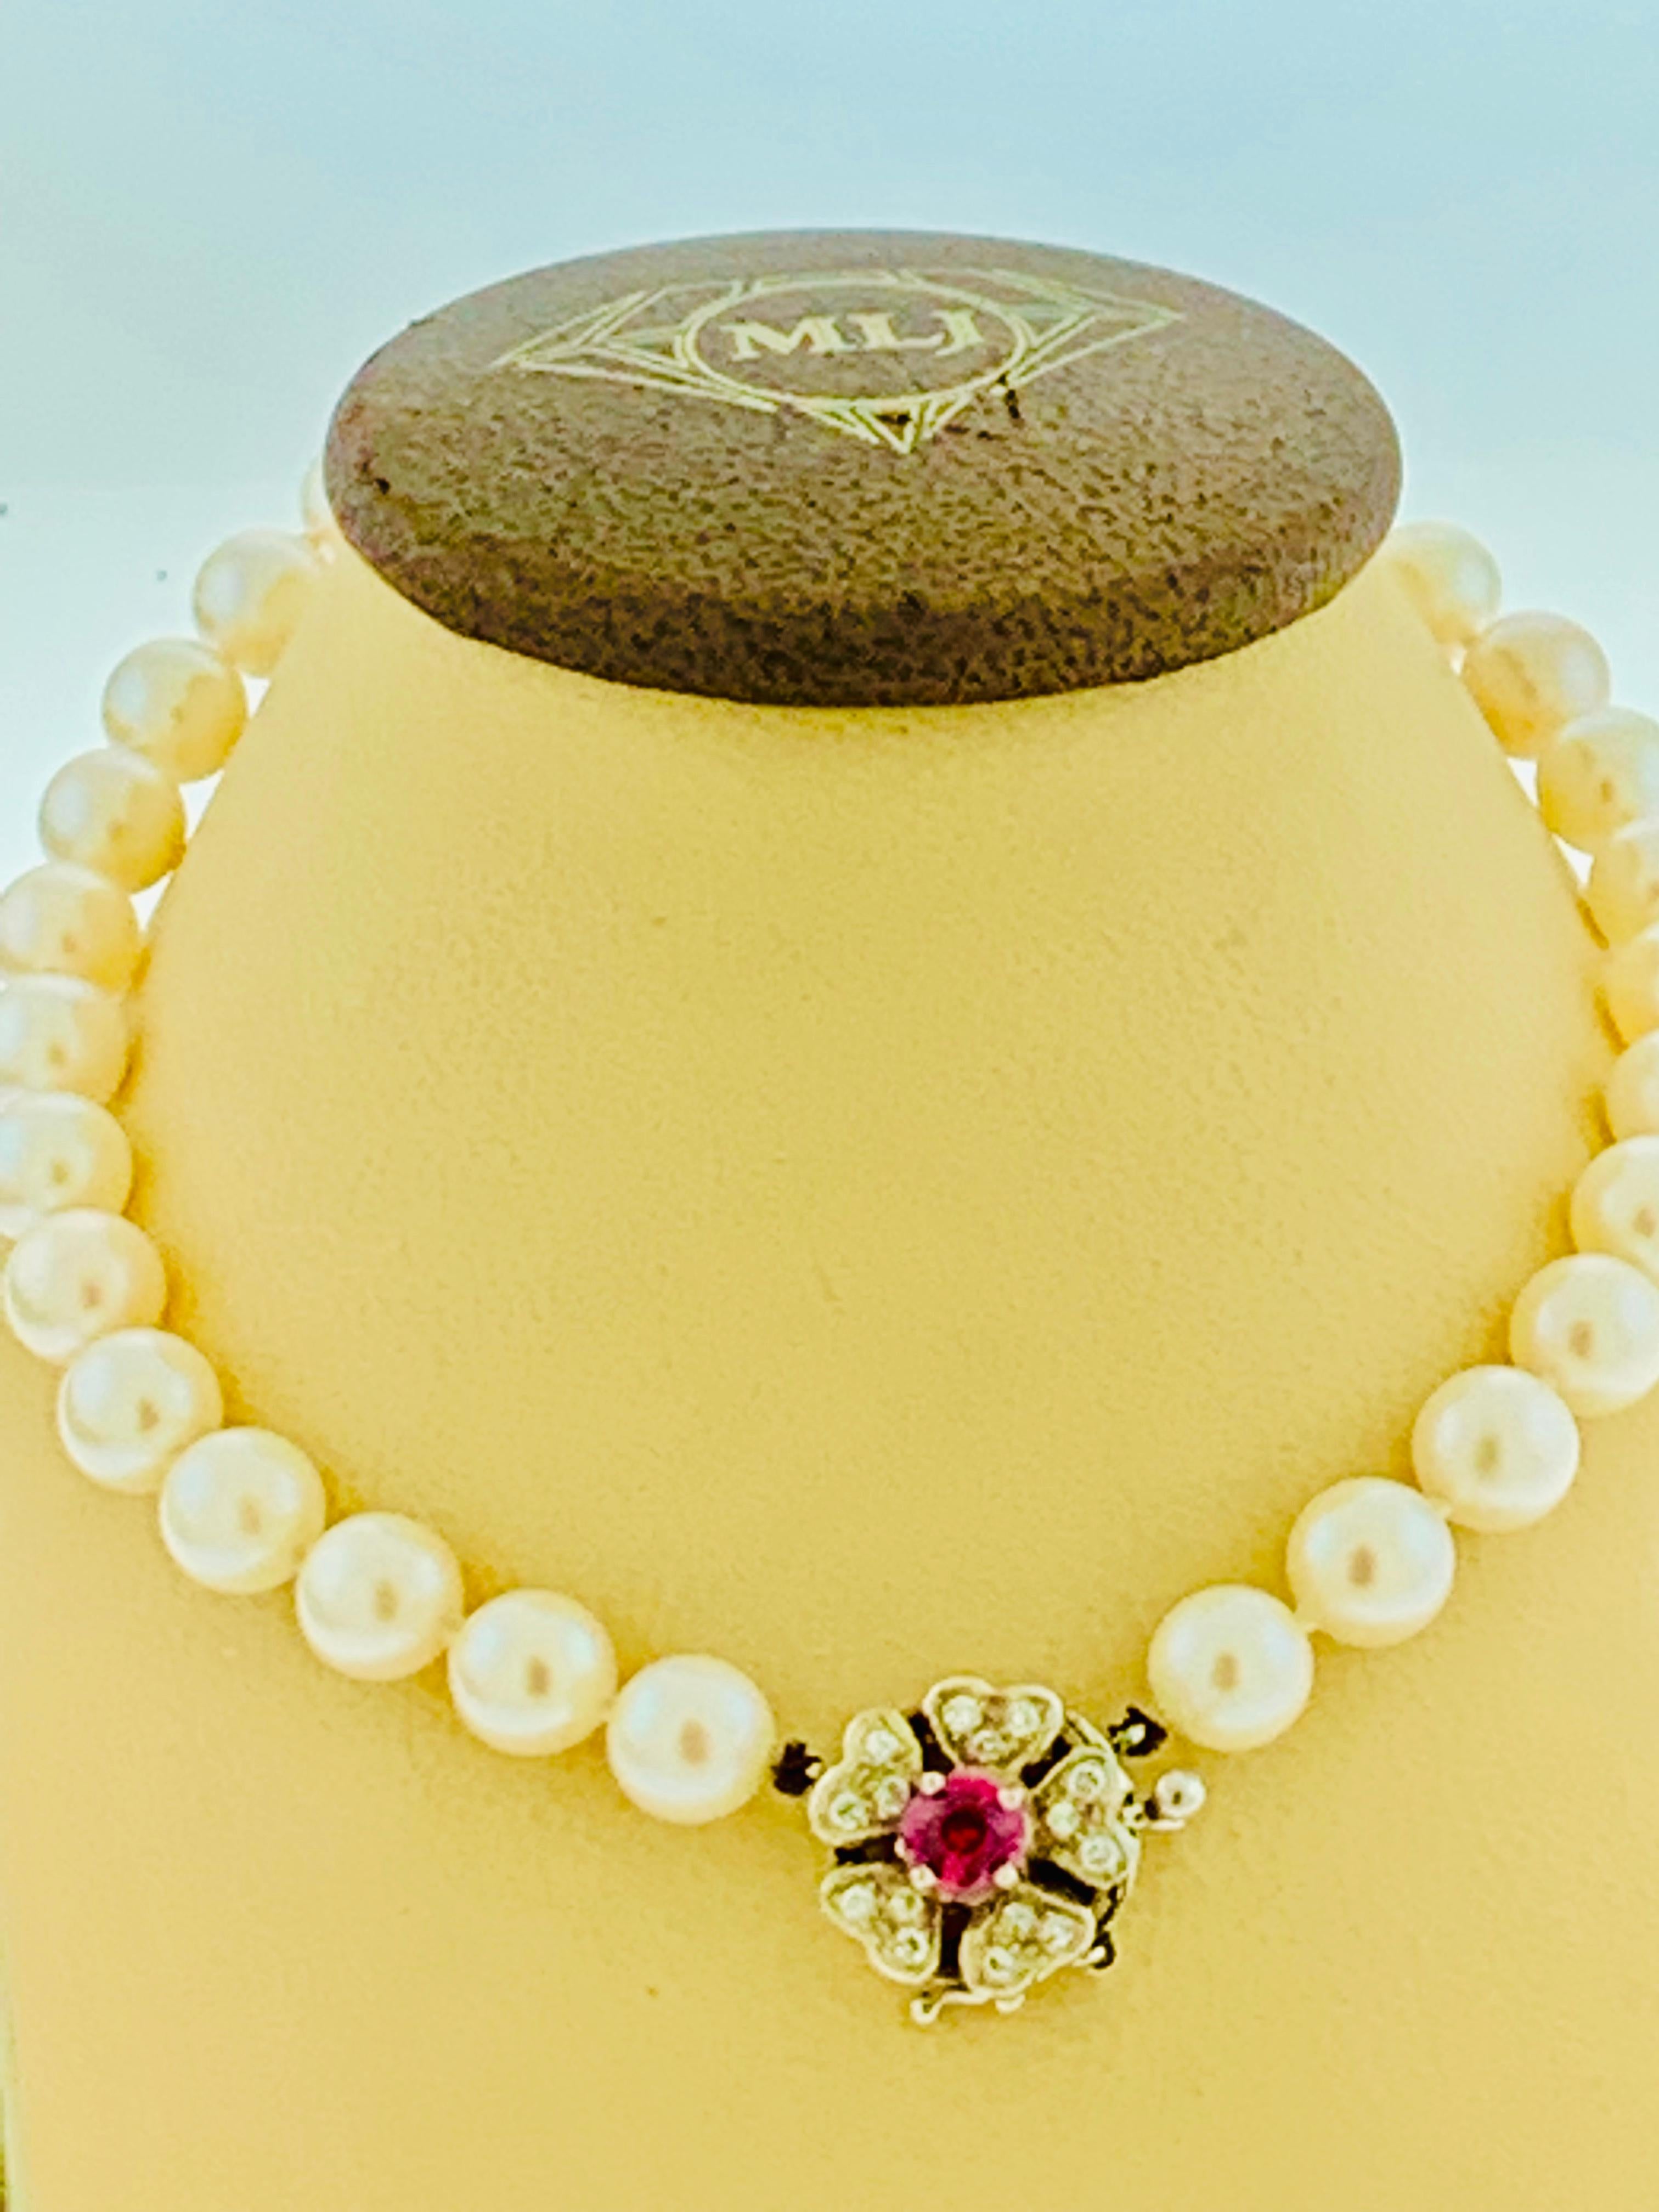 This marvelous vintage Pearl necklace features 1 row of luscious  pearls (measuring approx. 7.25mm - 7.5mm)  with 15 pieces of diamonds and 1 Ruby Gemstone in the clasp
VINTAGE

PRE-OWNED 

 ESTATE PIECE

14K White GOLD 
CLASP IS STAMPED 